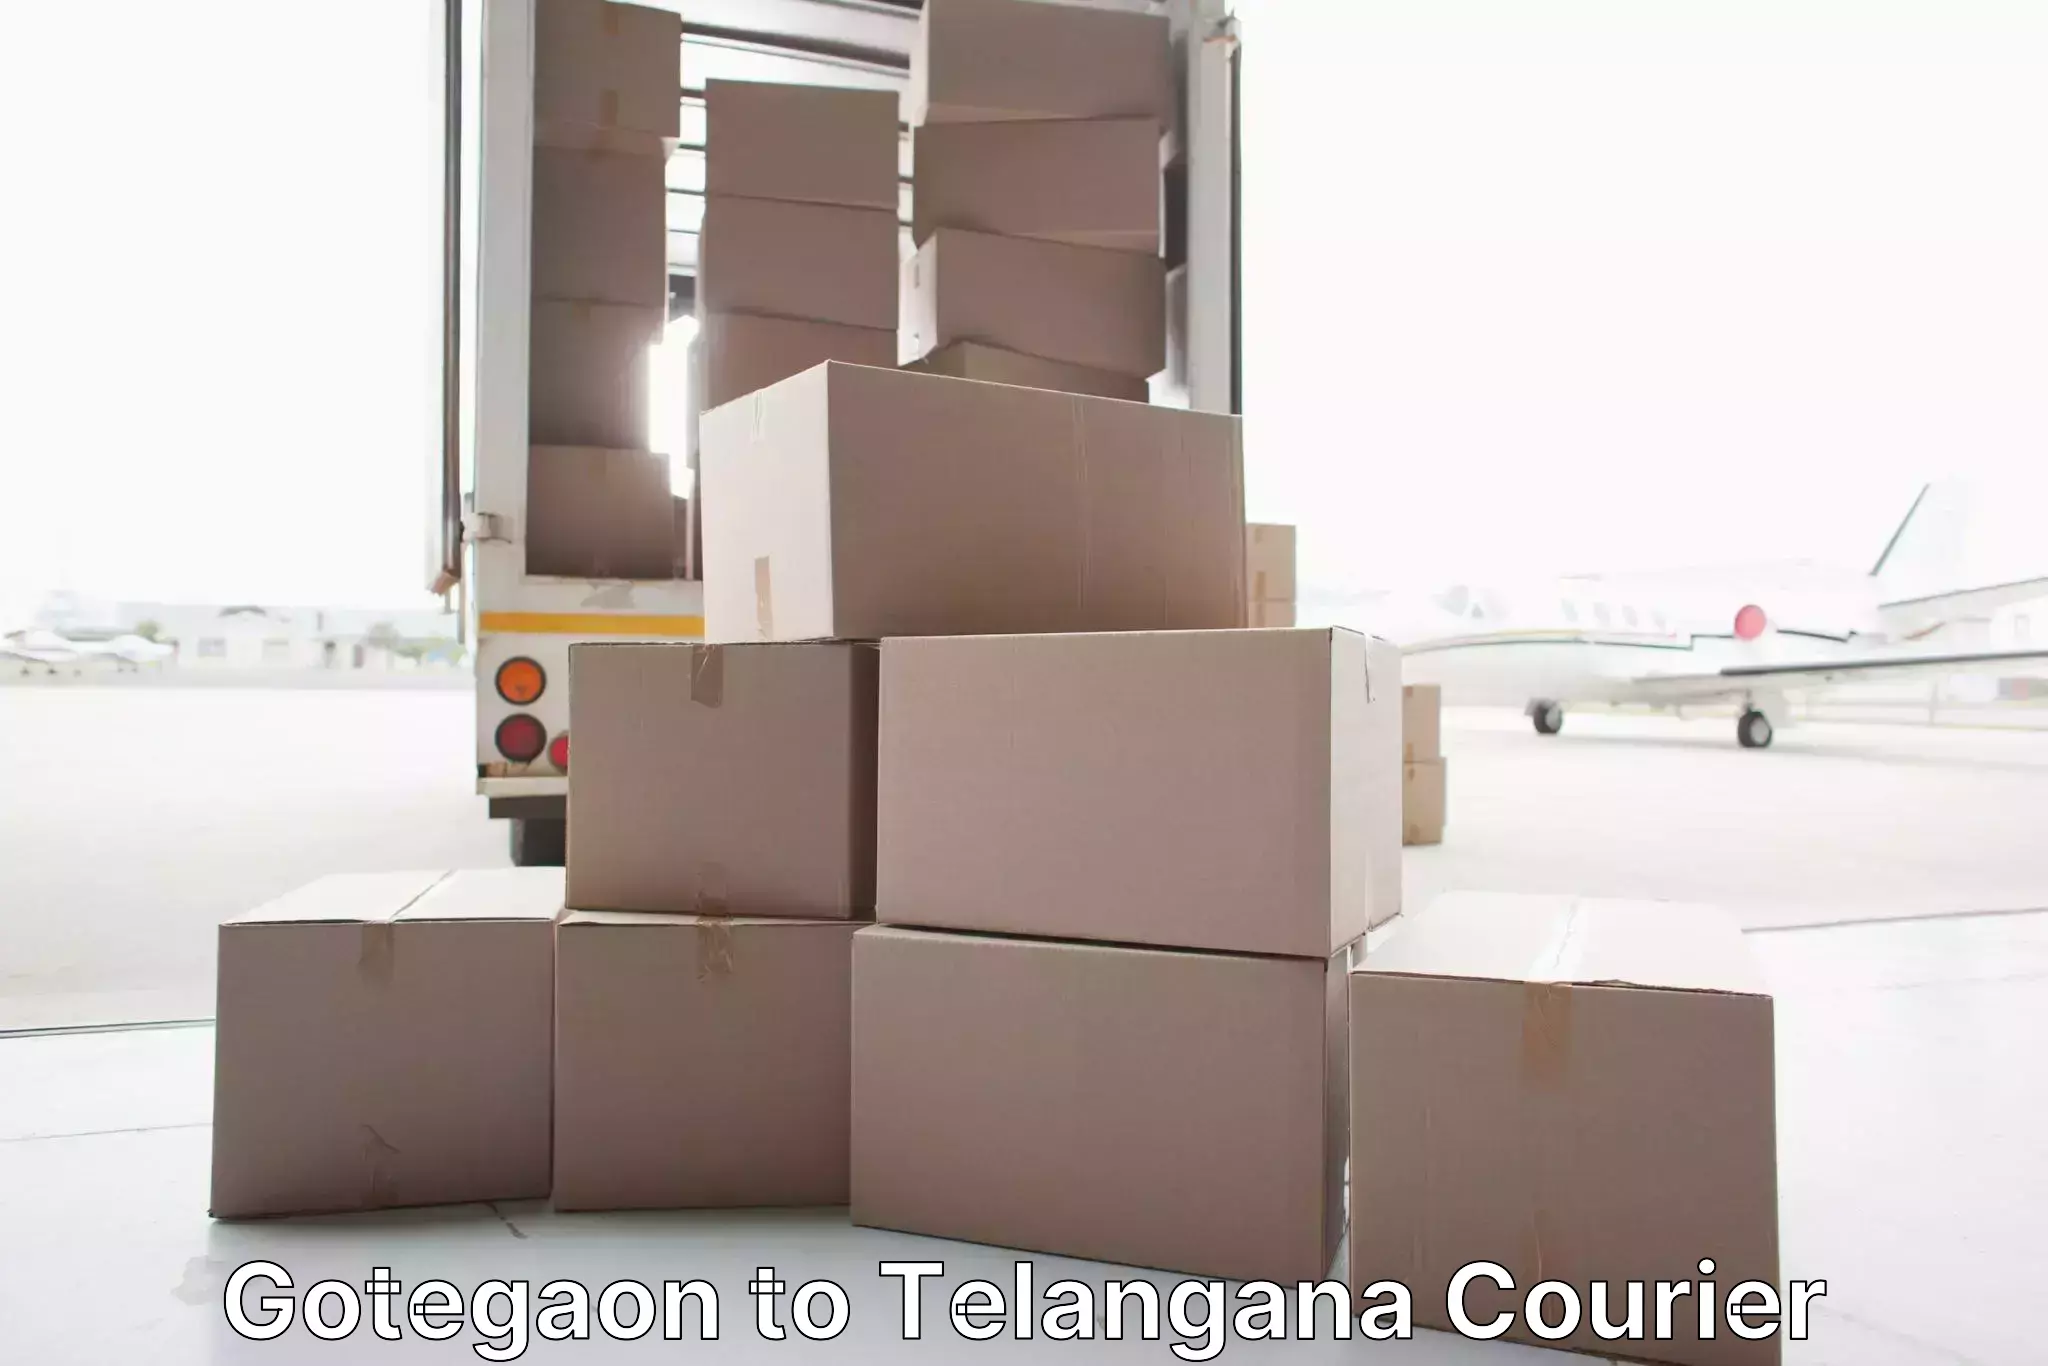 Cost-effective moving options Gotegaon to Balanagar